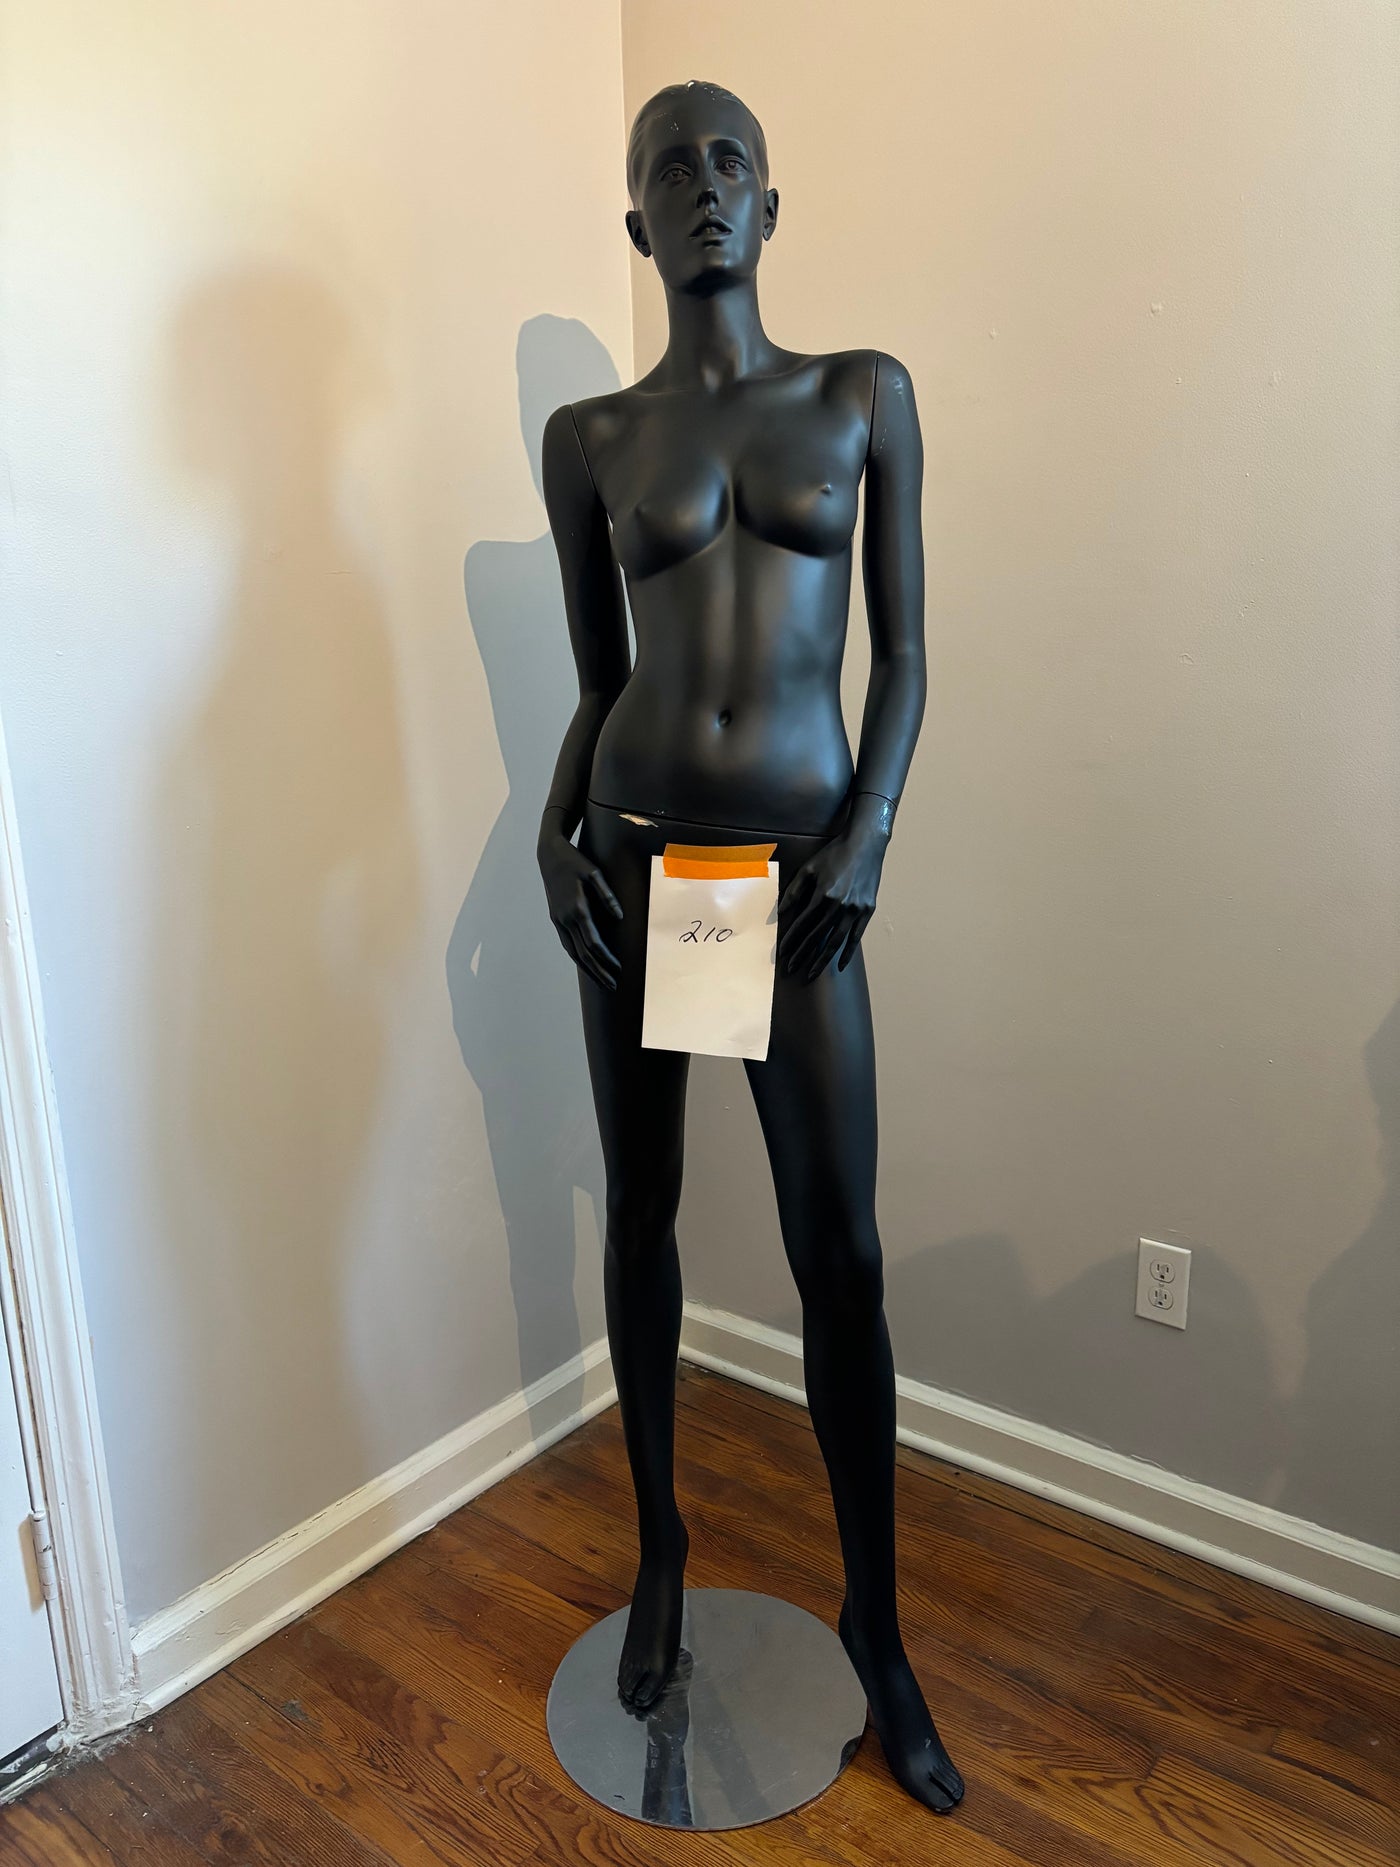 Used Female Adel Rootstein Mannequin #210 - Girl Thing